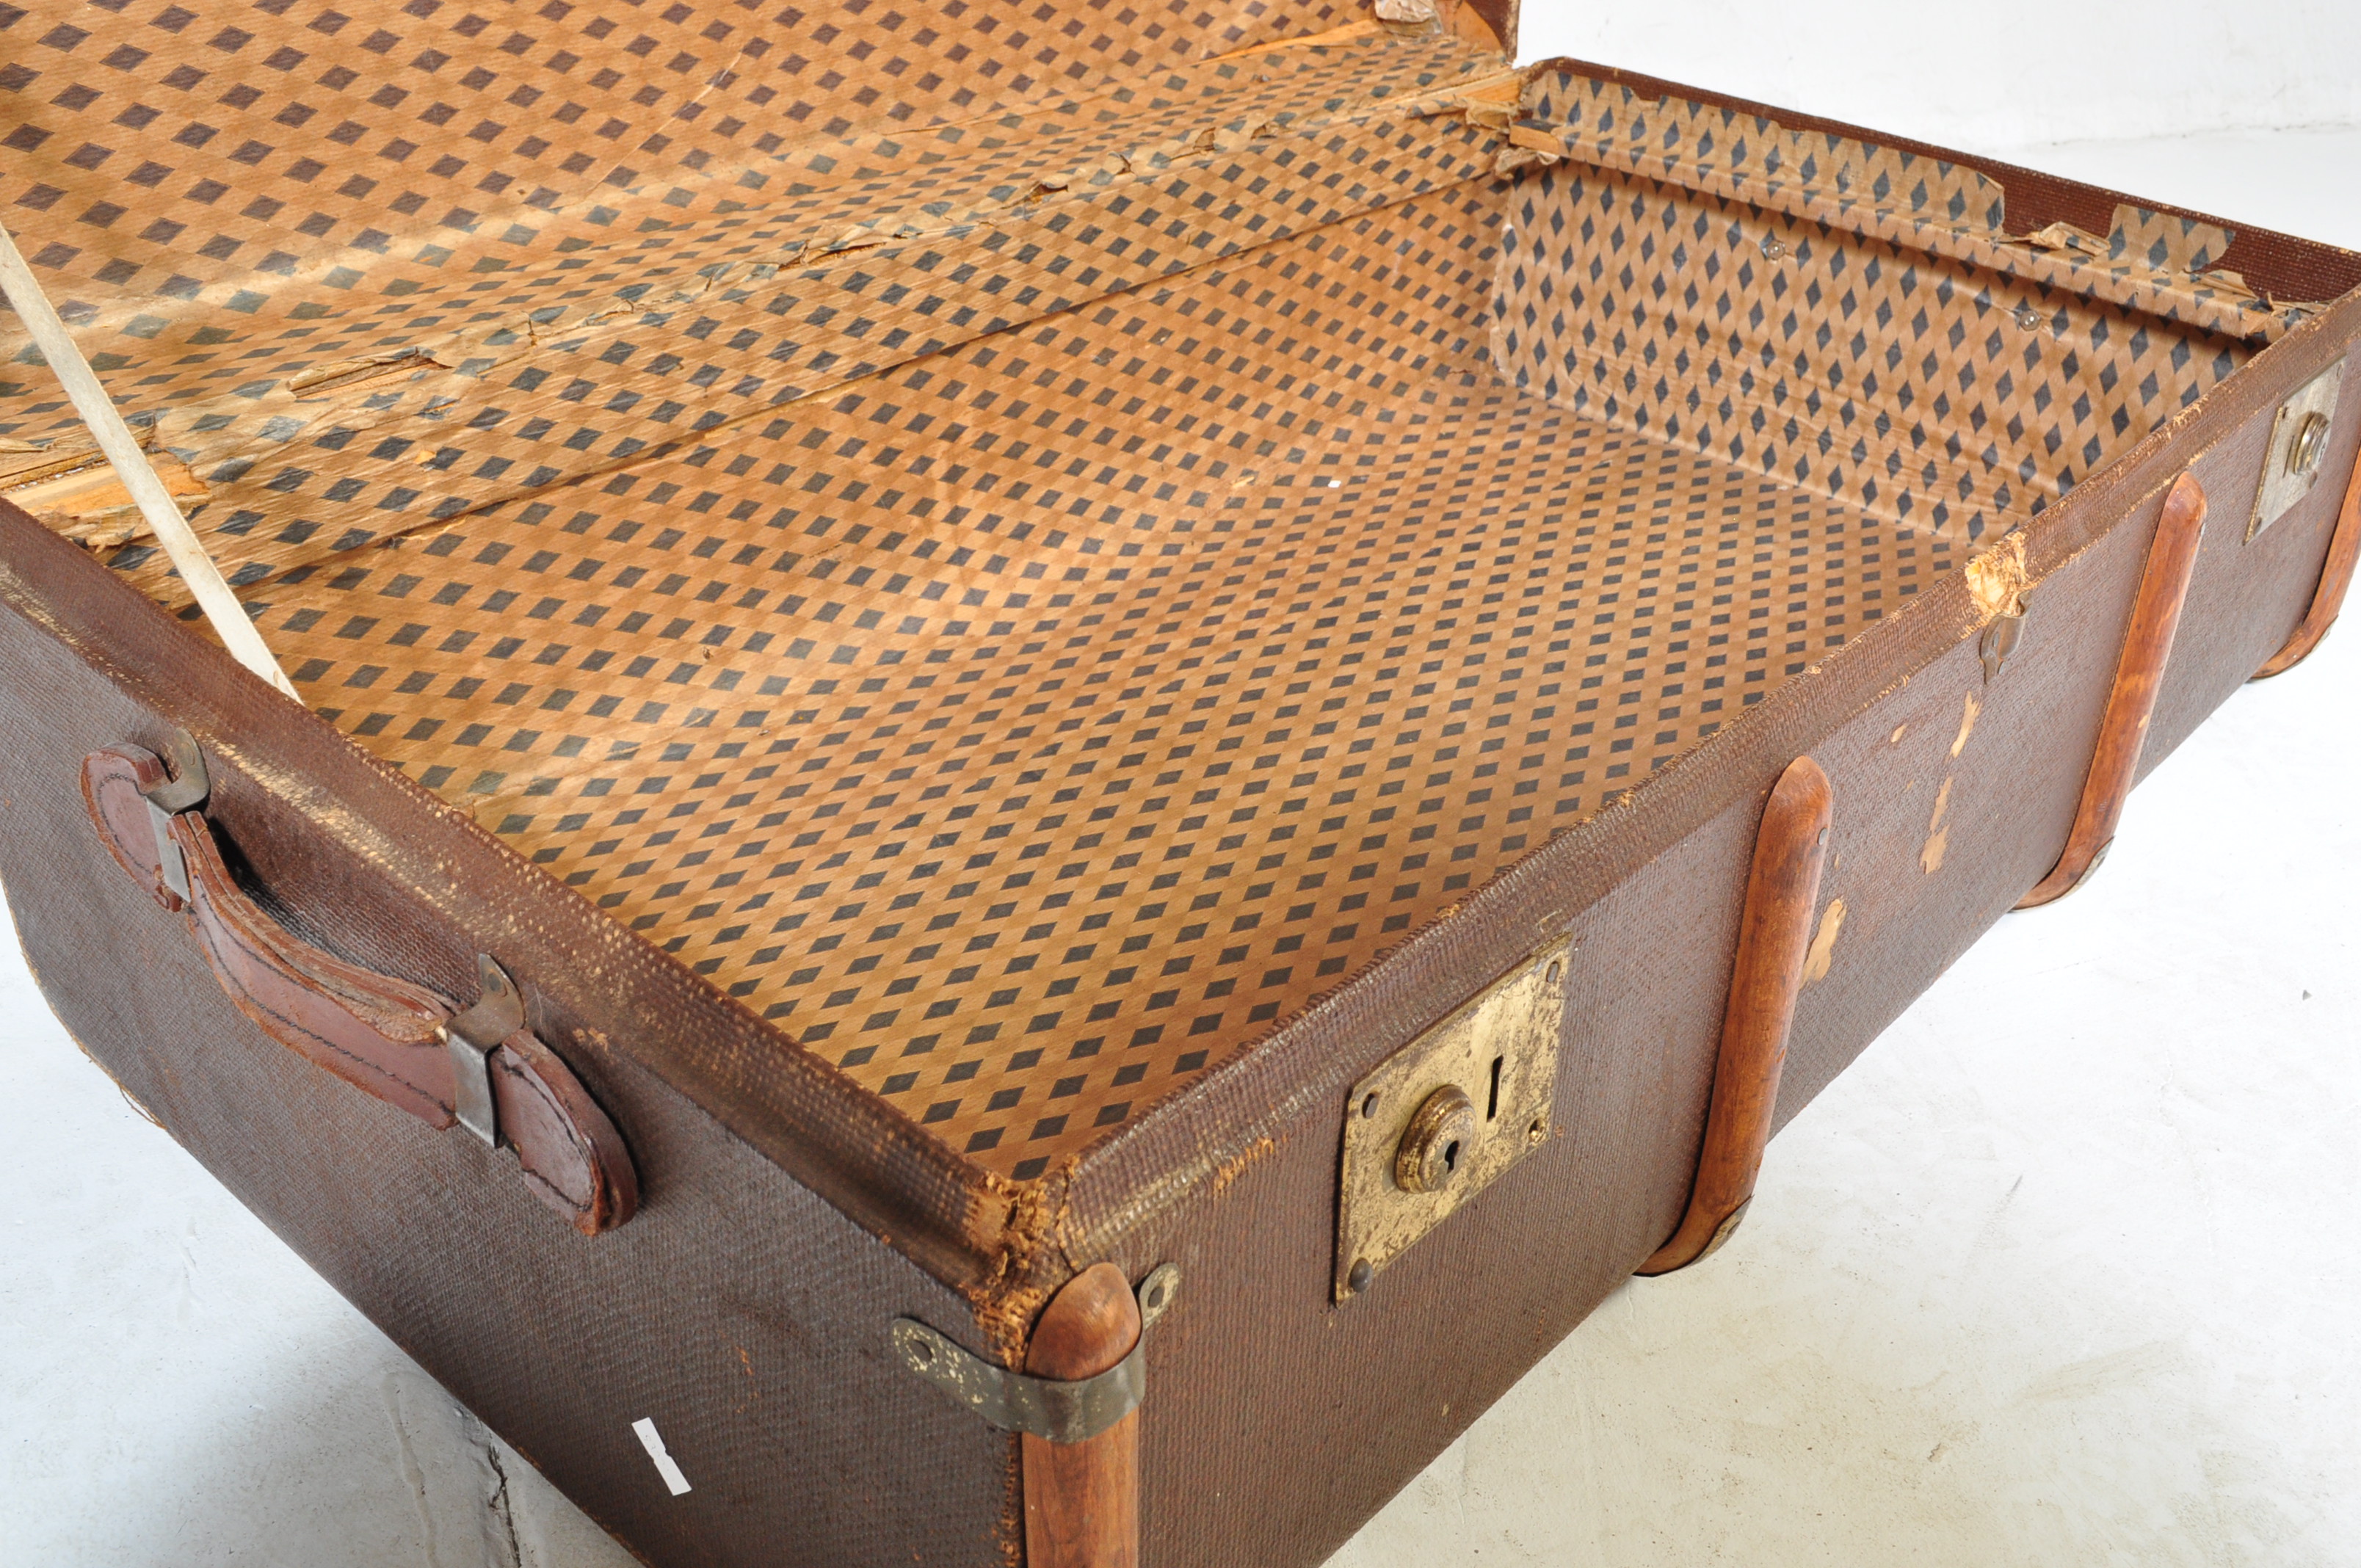 VINTAGE EARLY 20TH CENTURY RAILWAY TRAVEL SUITCASE - Image 5 of 6